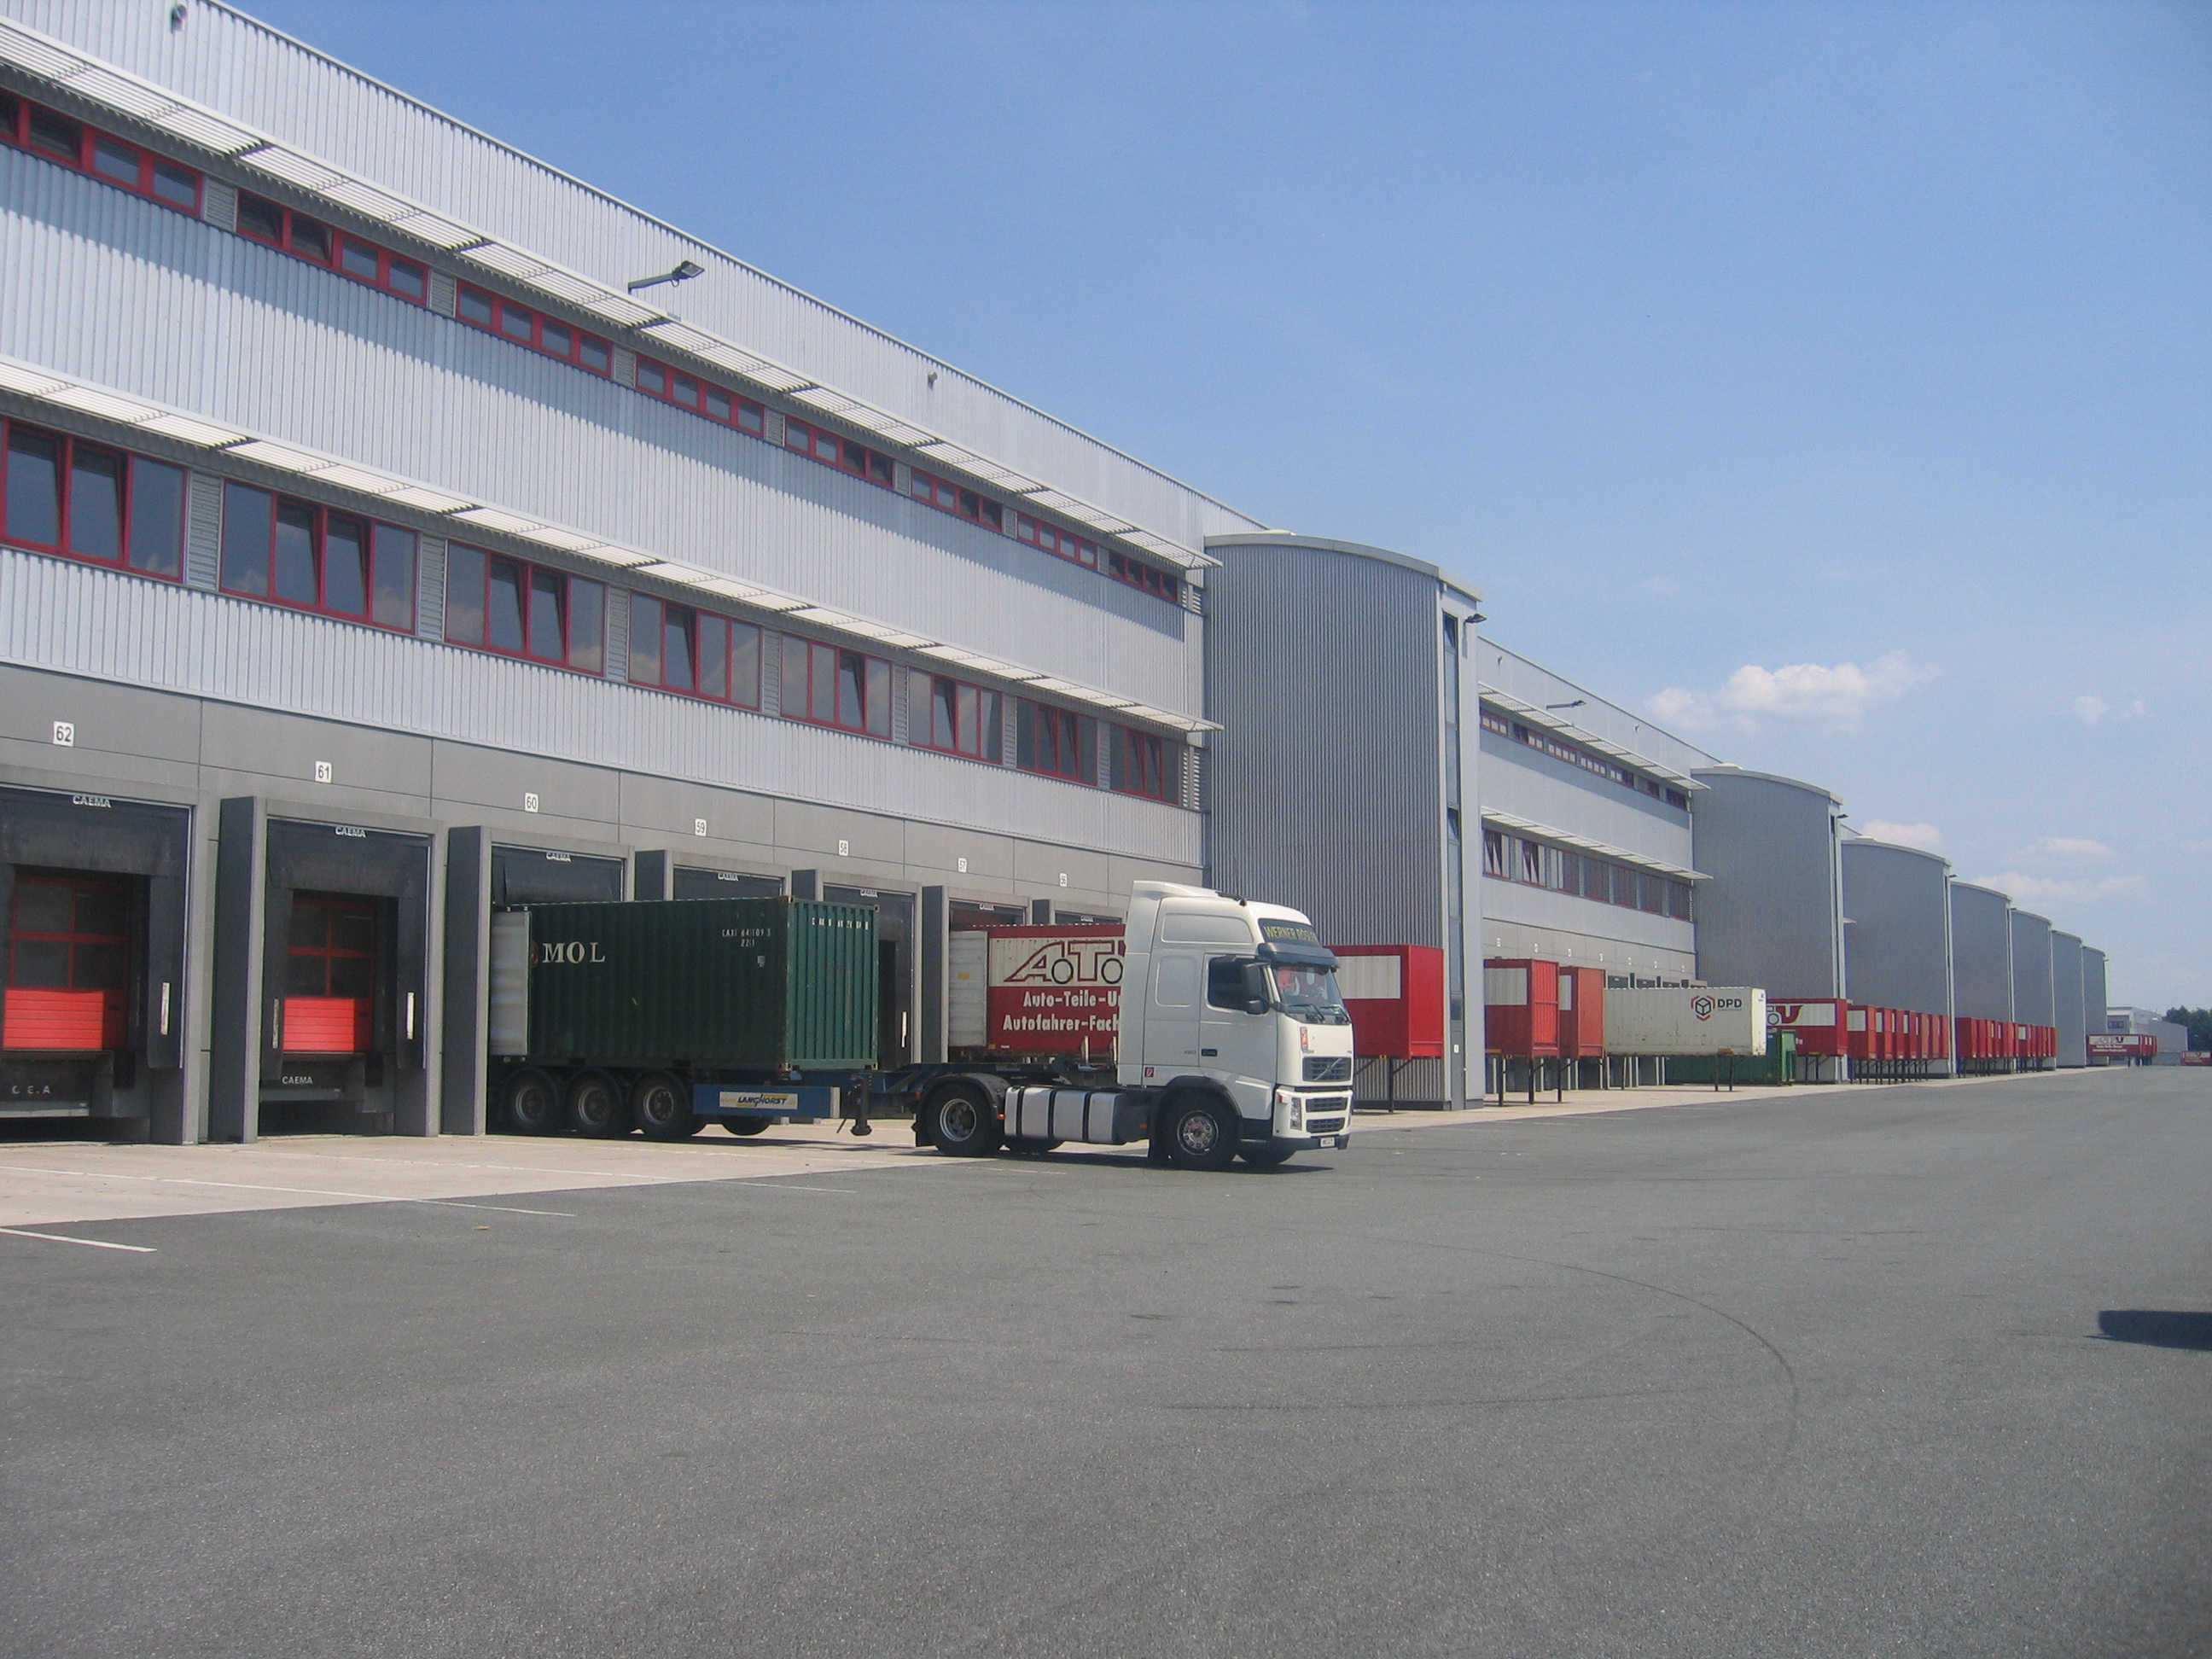 Werl - Exterior of warehouse viewing the loading bays with trucks parked